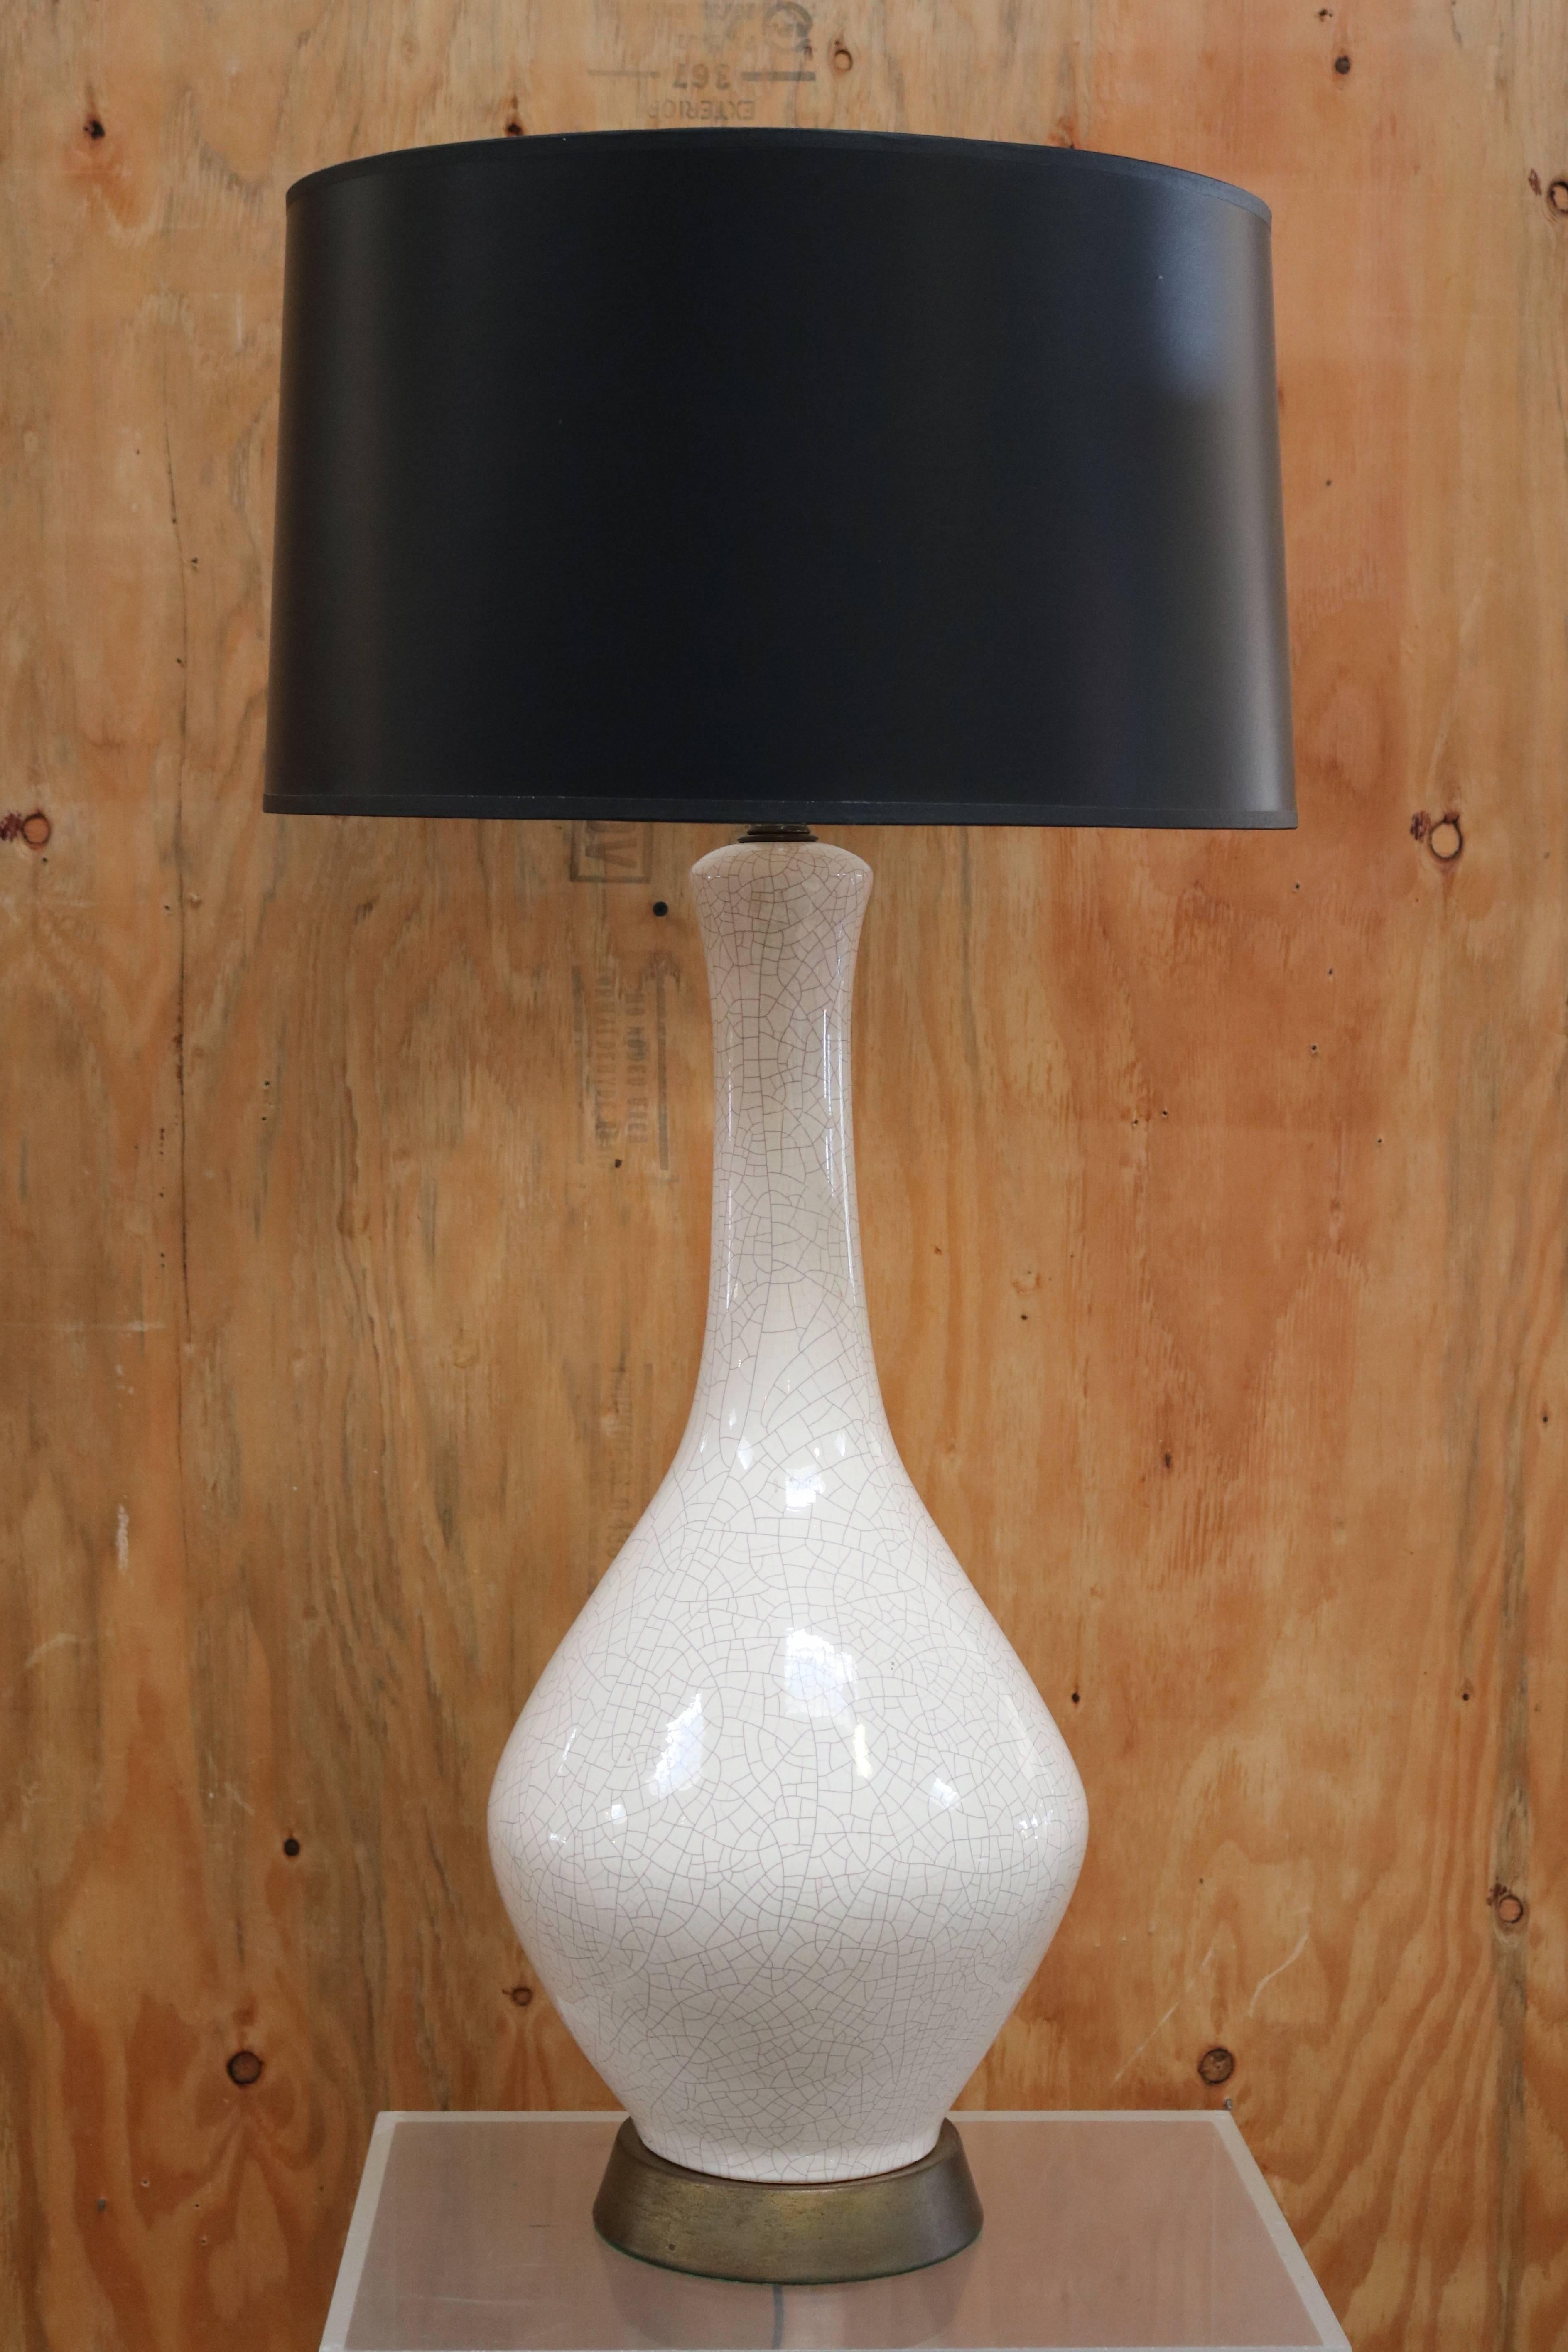 This table lamp has a vase-shaped body in white crackled ceramic. It sits on a round brass base and has a black paper custom-made shade.